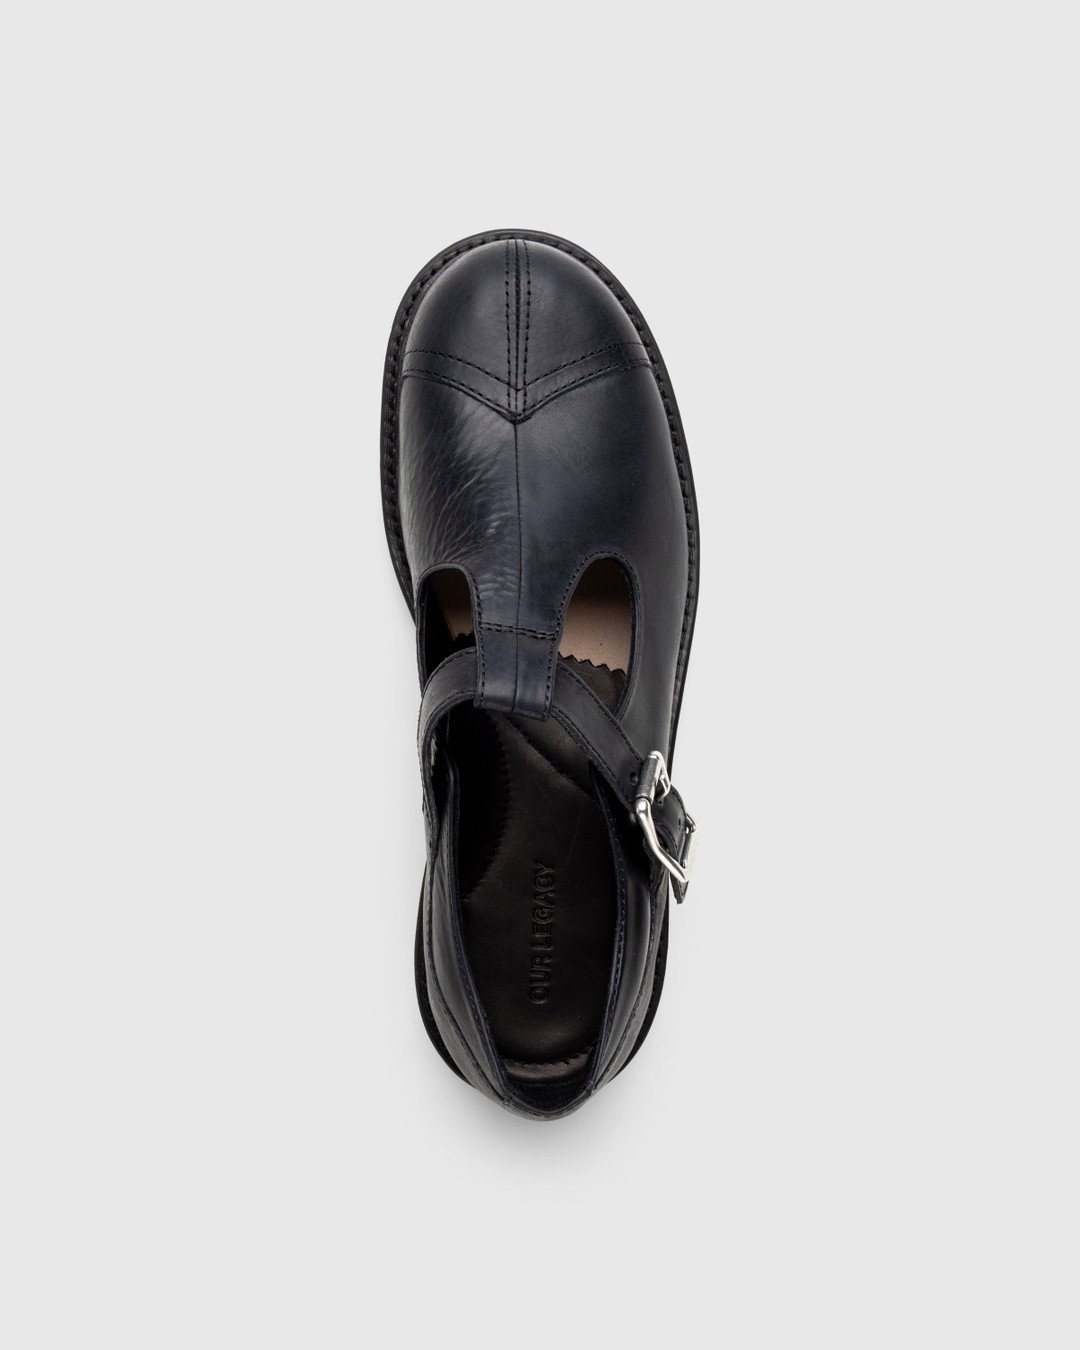 Our Legacy – Camden Shoe Car Tire Black Leather | Highsnobiety Shop